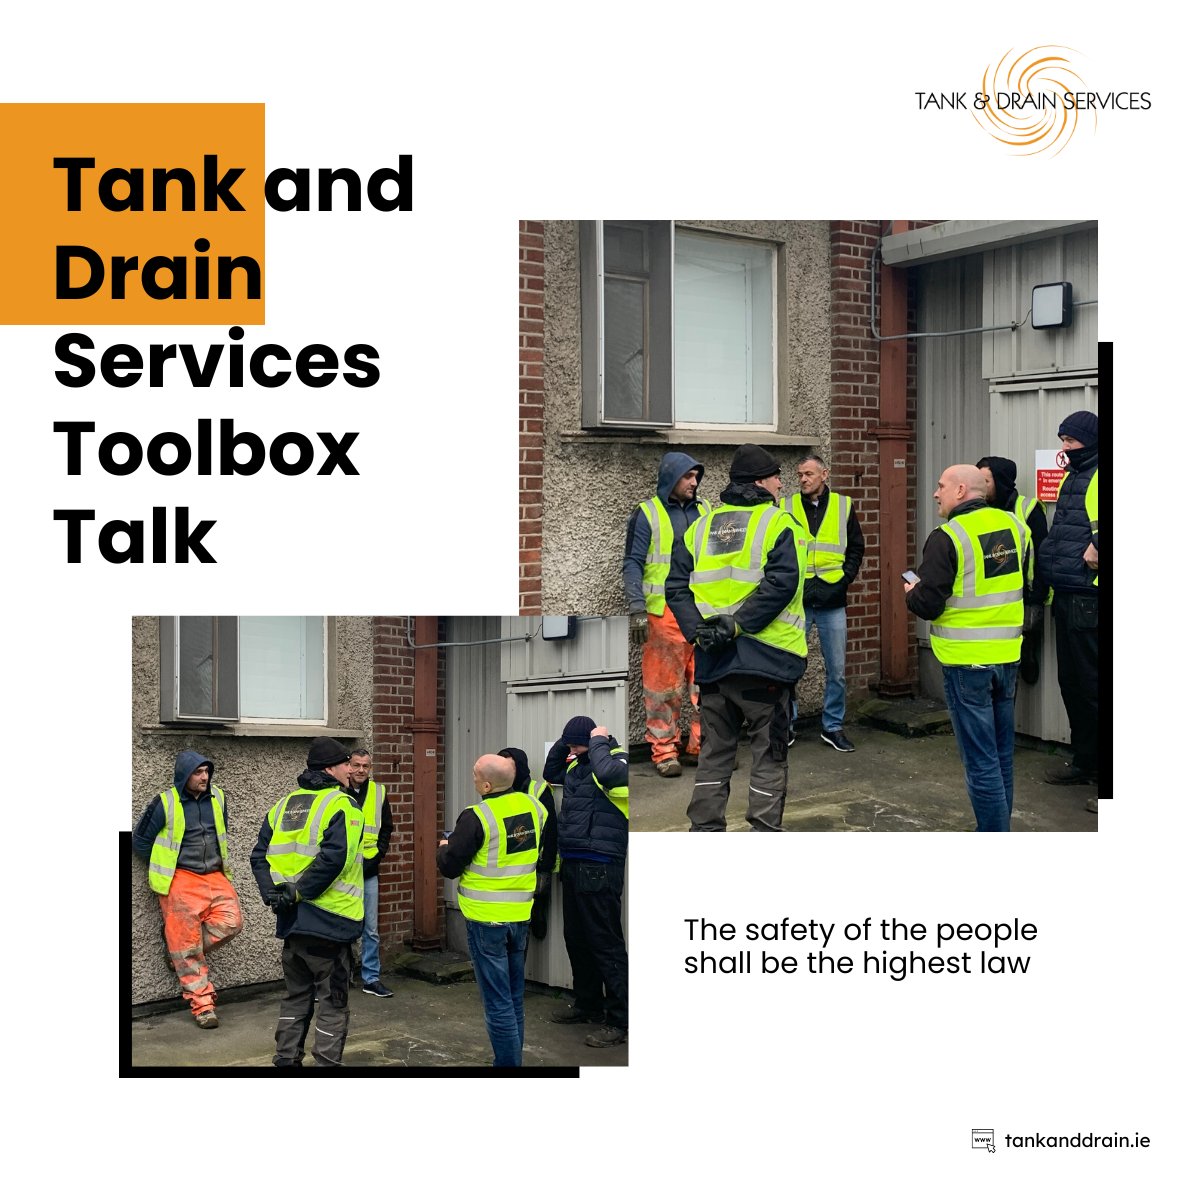 Our monthly toolbox talks are to refresh our staff's knowledge at the start of the work day with safety at the forefront of everyone’s minds. 

#toolboxtalk #tankanddrainservices #safety #safetyfirst